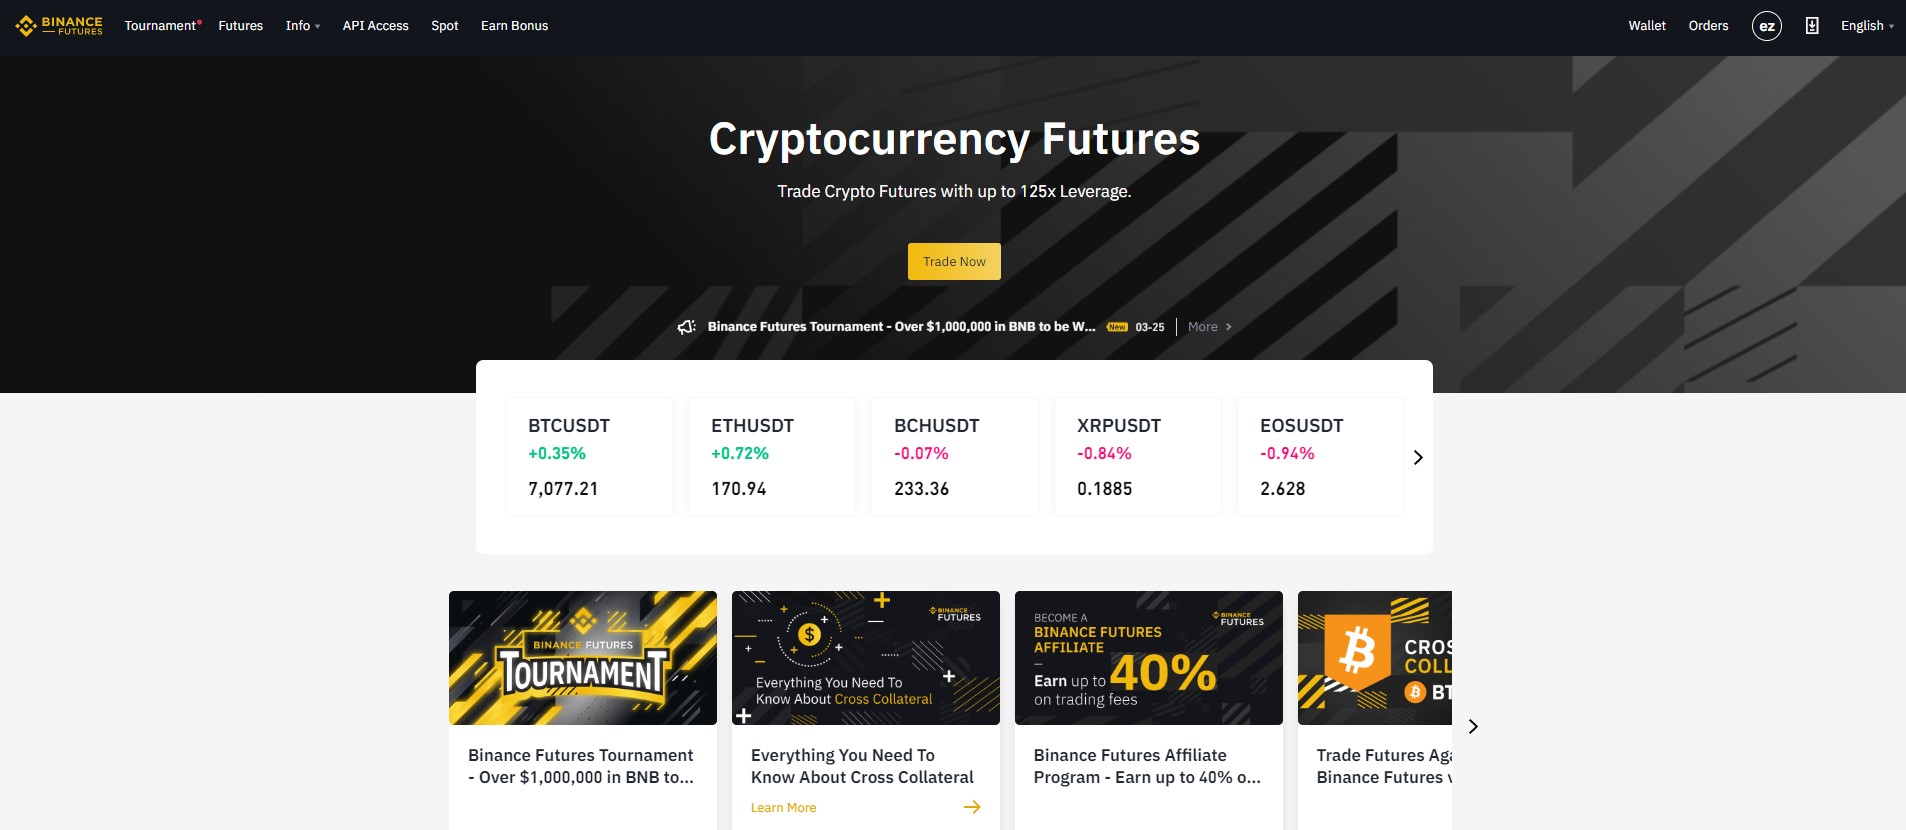 Binance Review (2020) - Should You Use It?